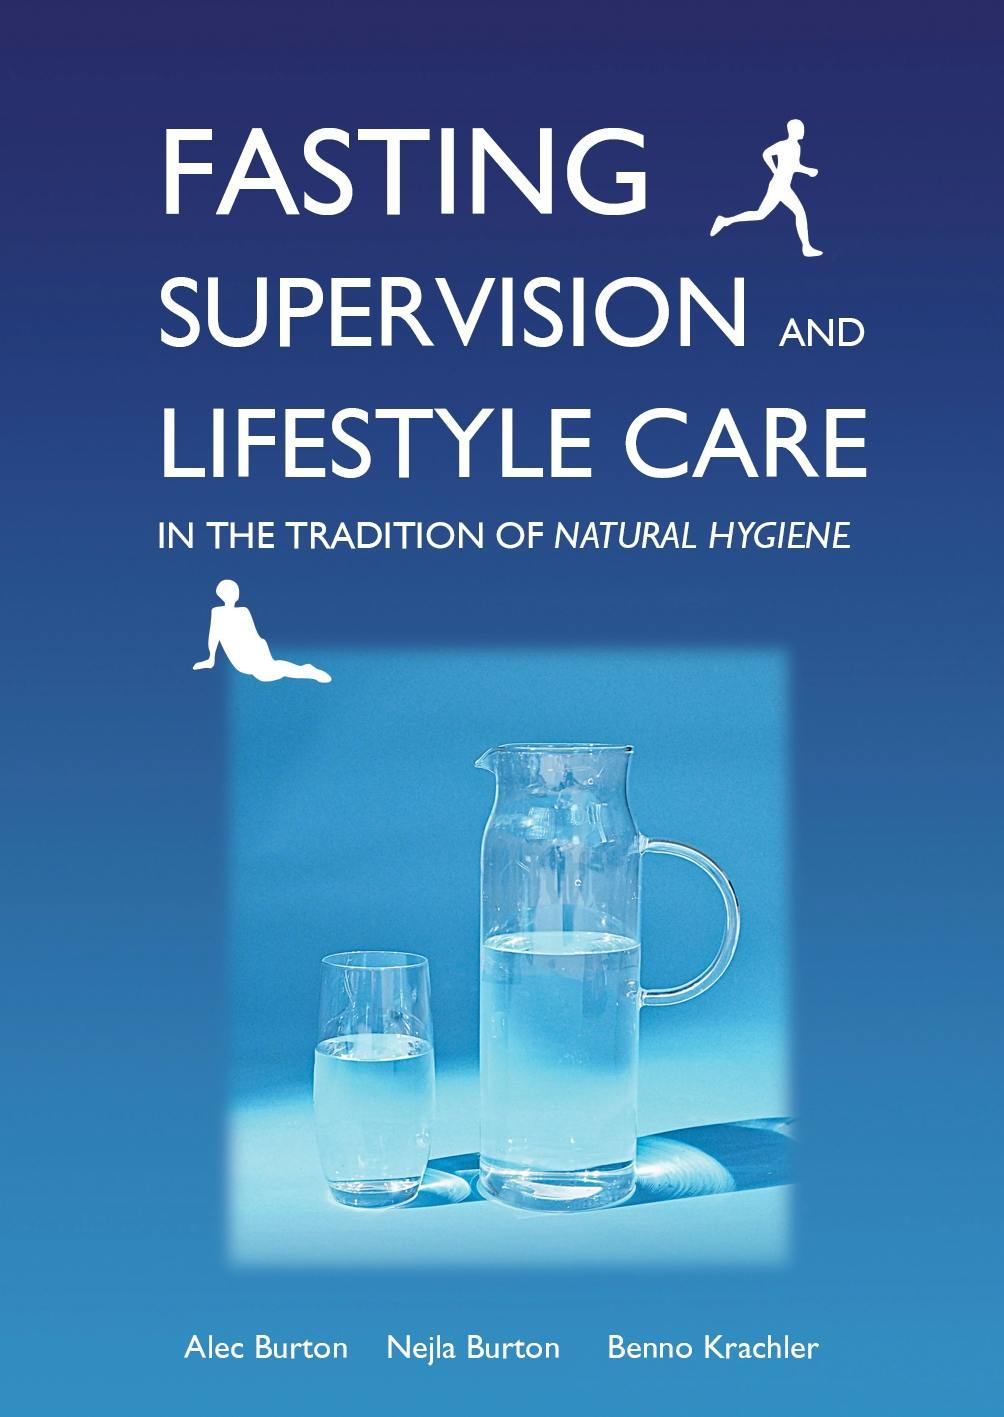 Fasting Supervision and Lifestyle Care in the Tradition of Natural Hygiene - Alec Burton, Benno Krachler, Nejla Burton